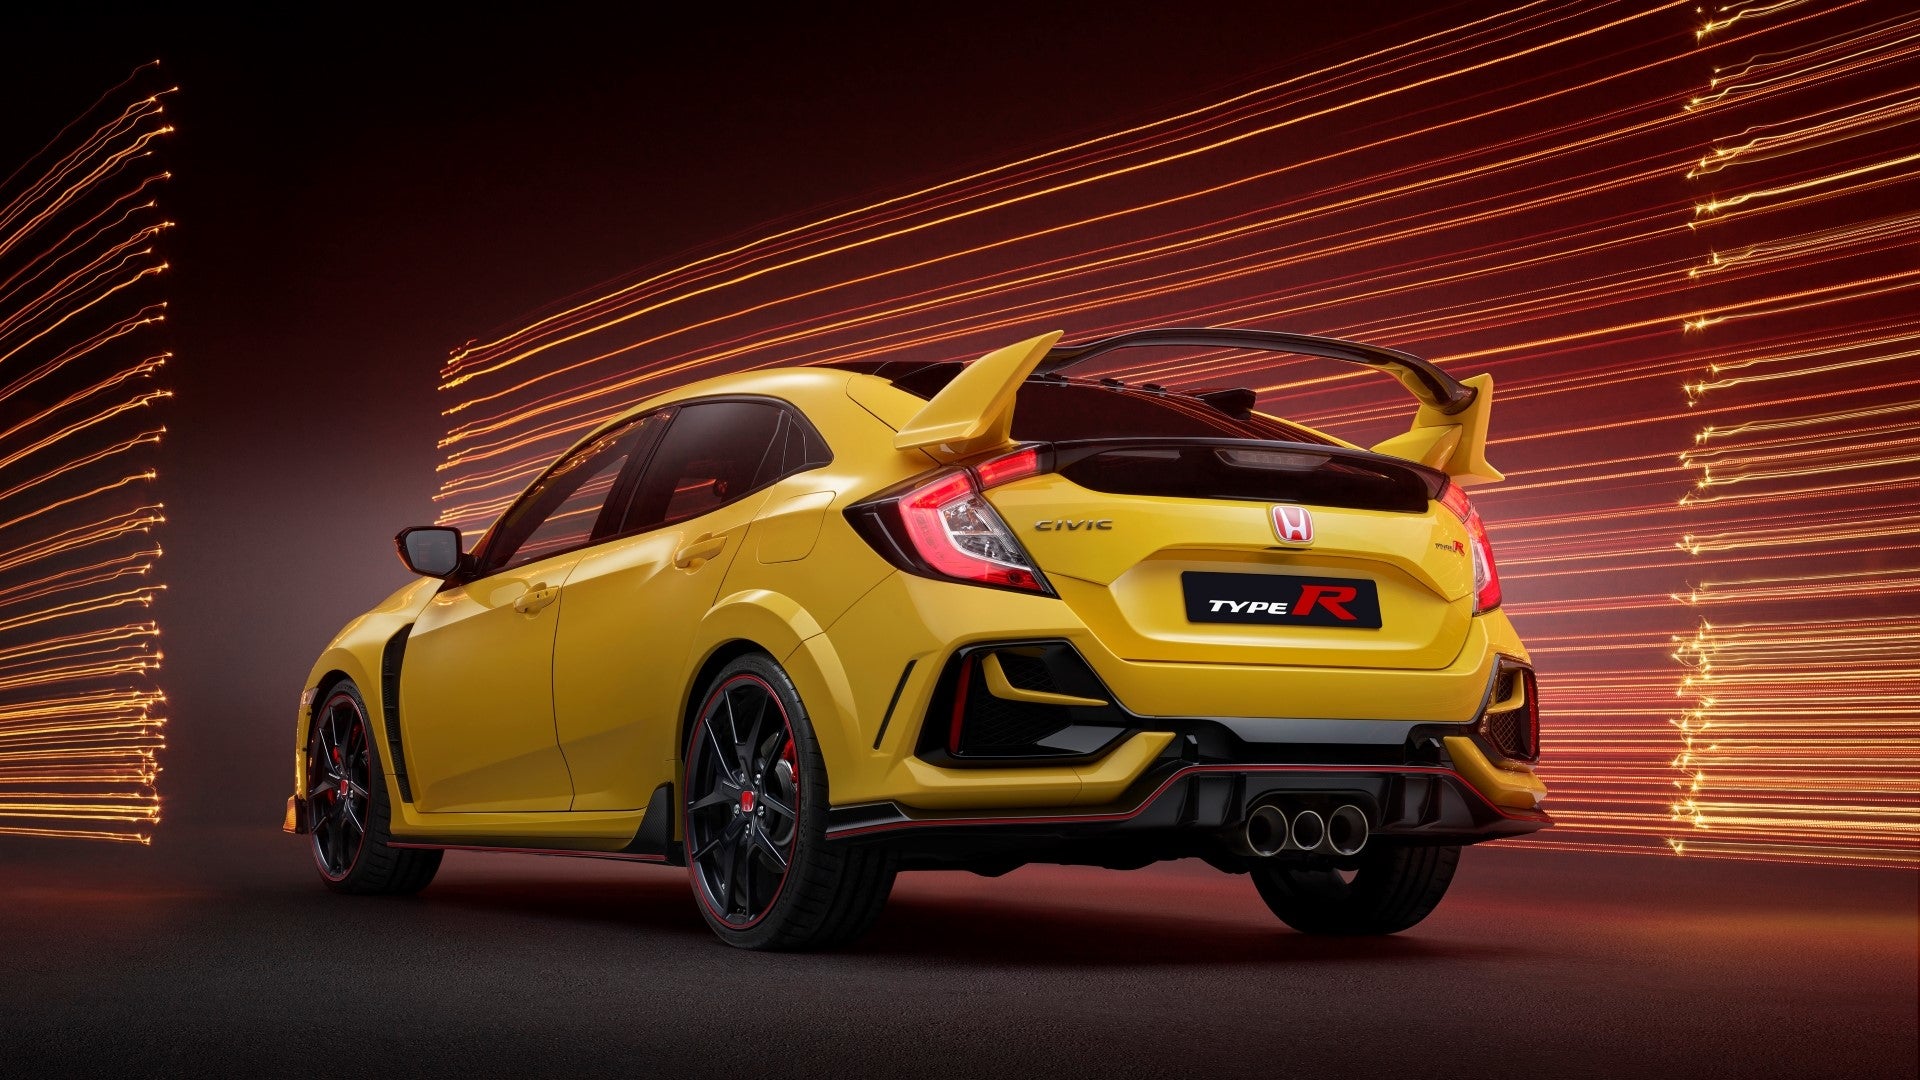 21 Honda Civic Type R Limited Edition Is Lighter Grippier And Very Yellow